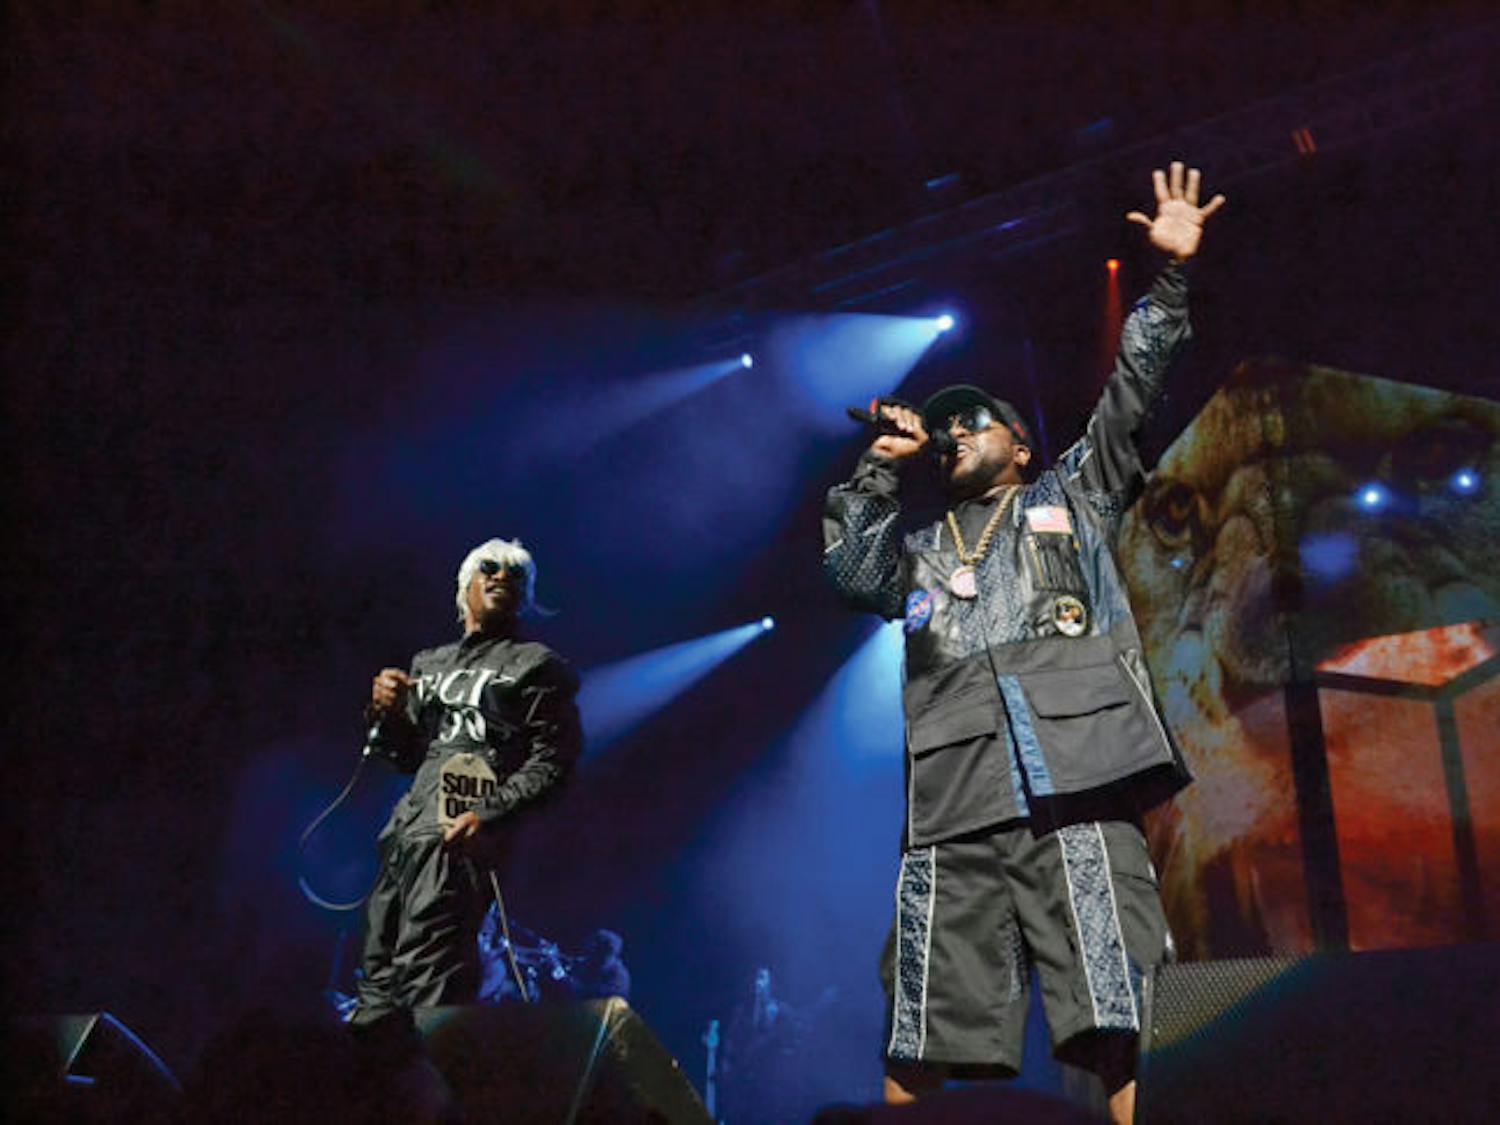 Outkast at the MidFlorida Credit Union Amphitheatre for Big Guava, during its first Florida performance in years. &nbsp;
&nbsp;